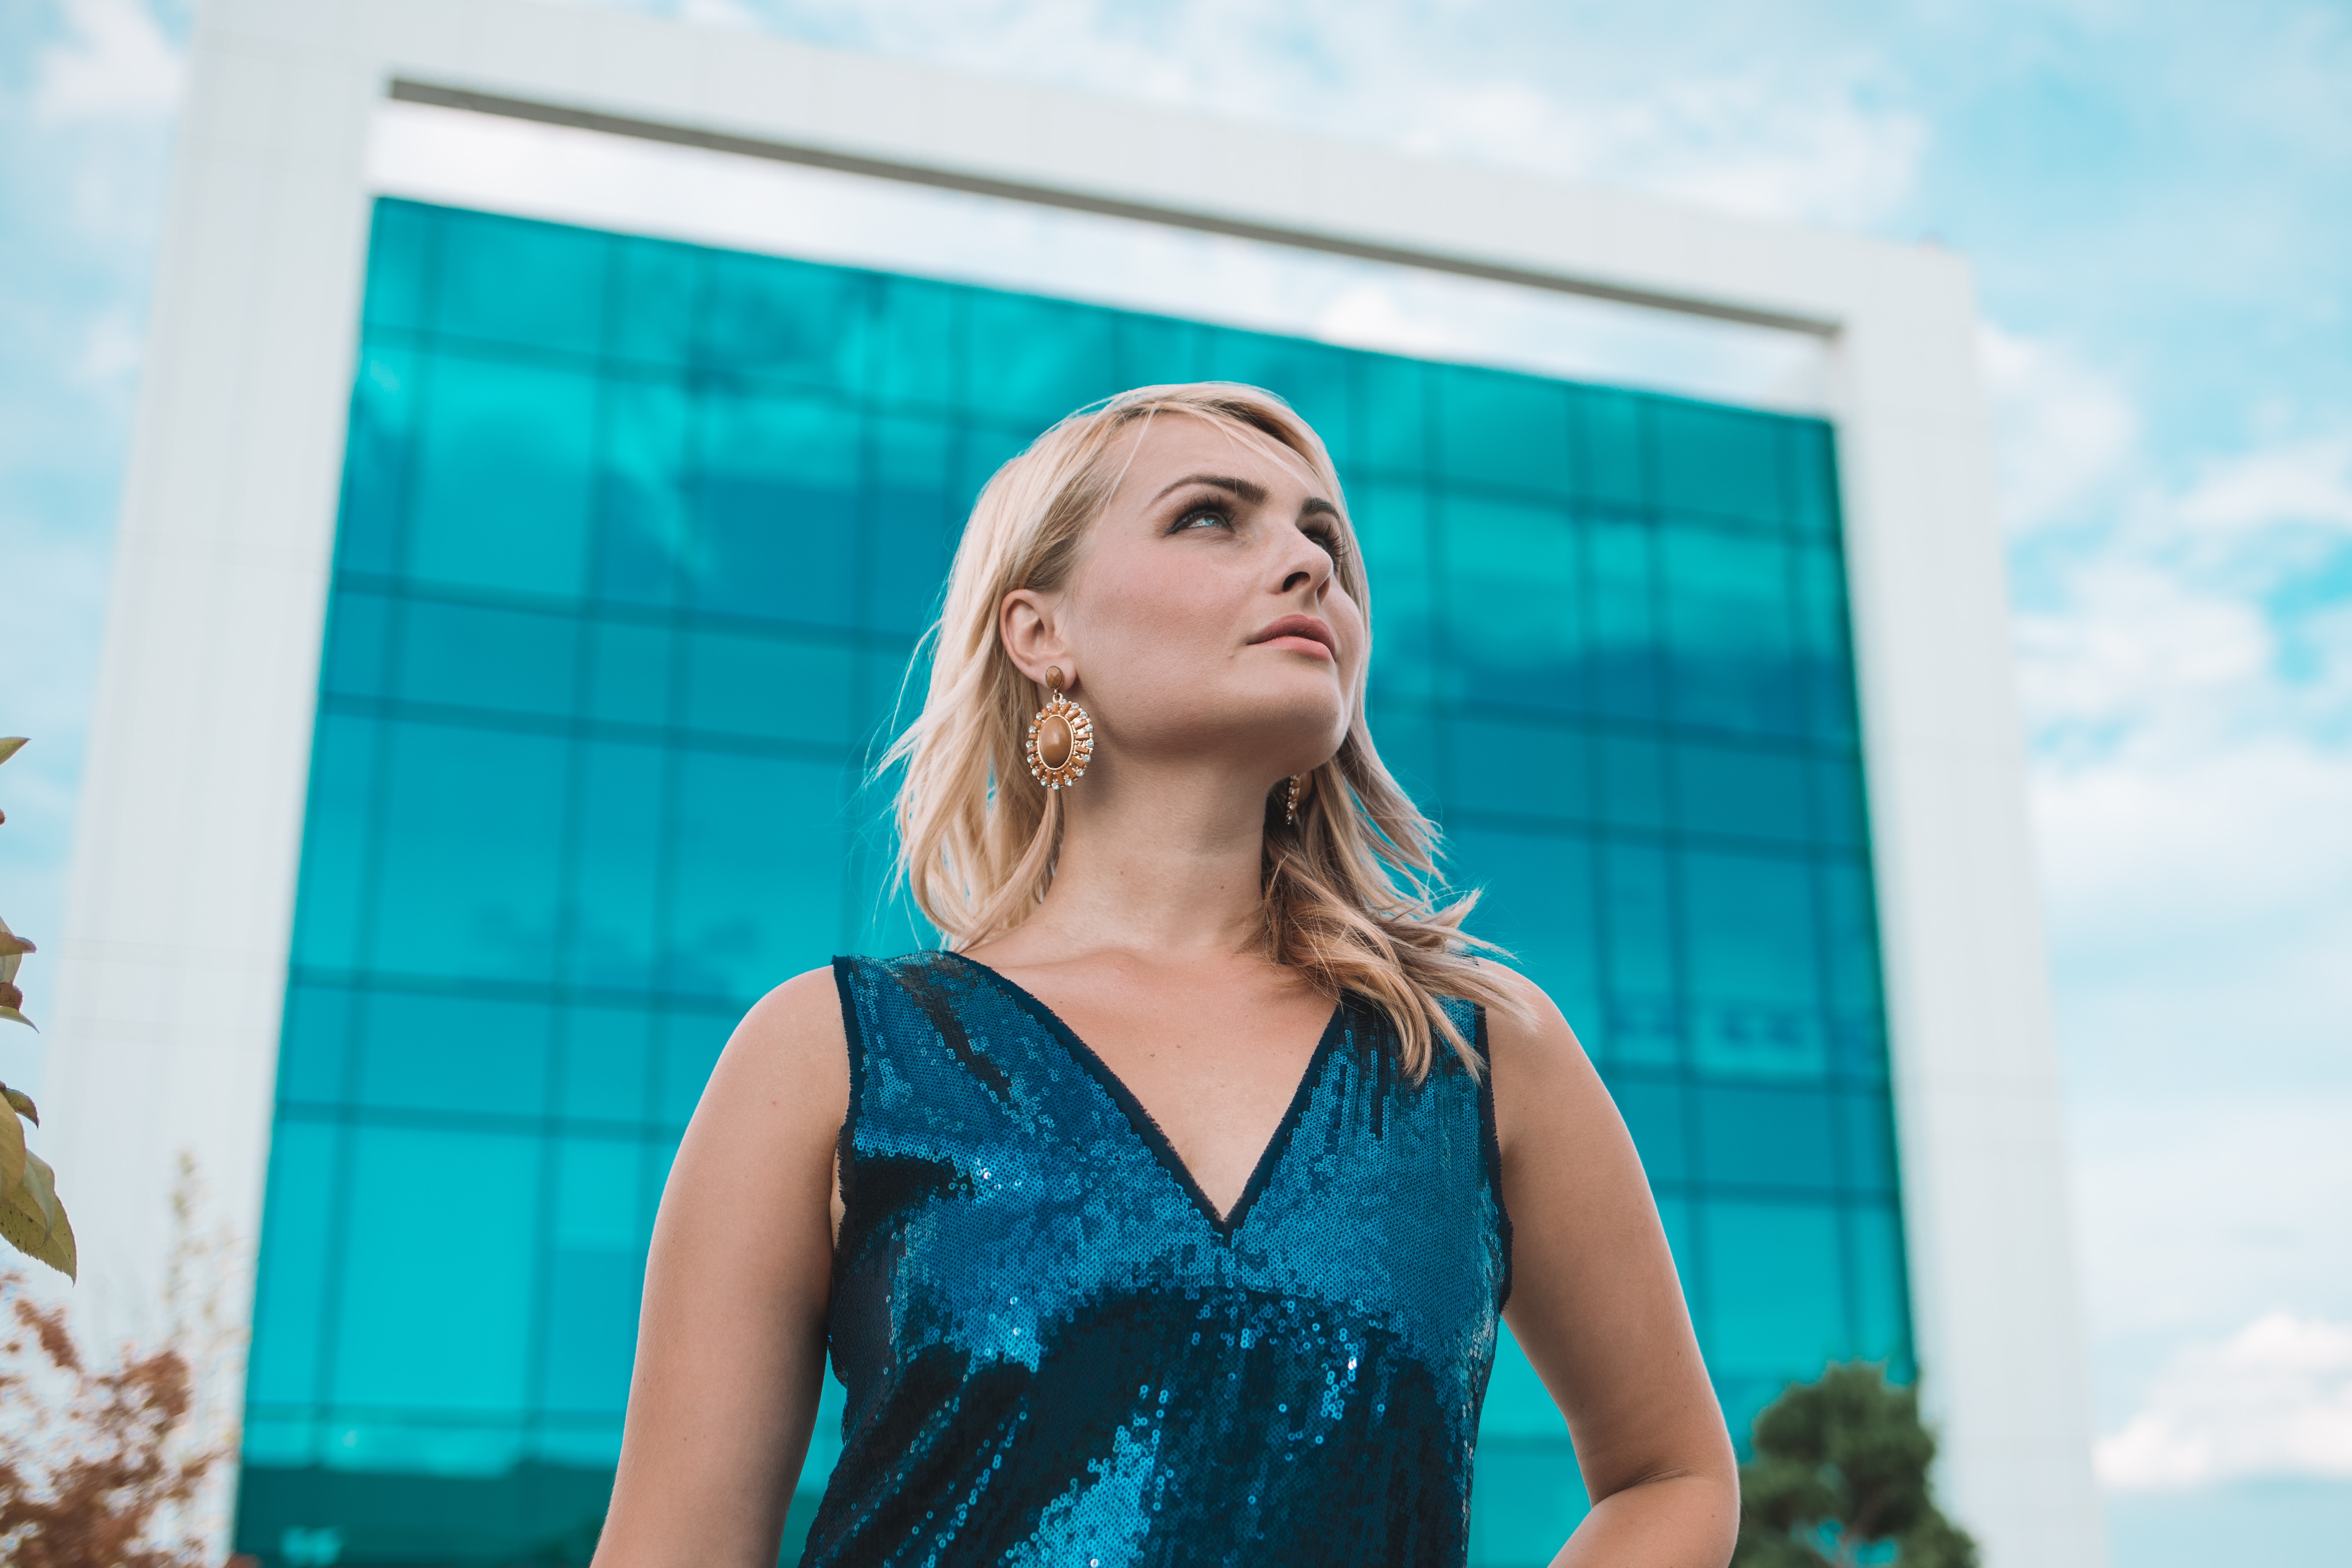 woman standing in front of building - july 2019 real estate news